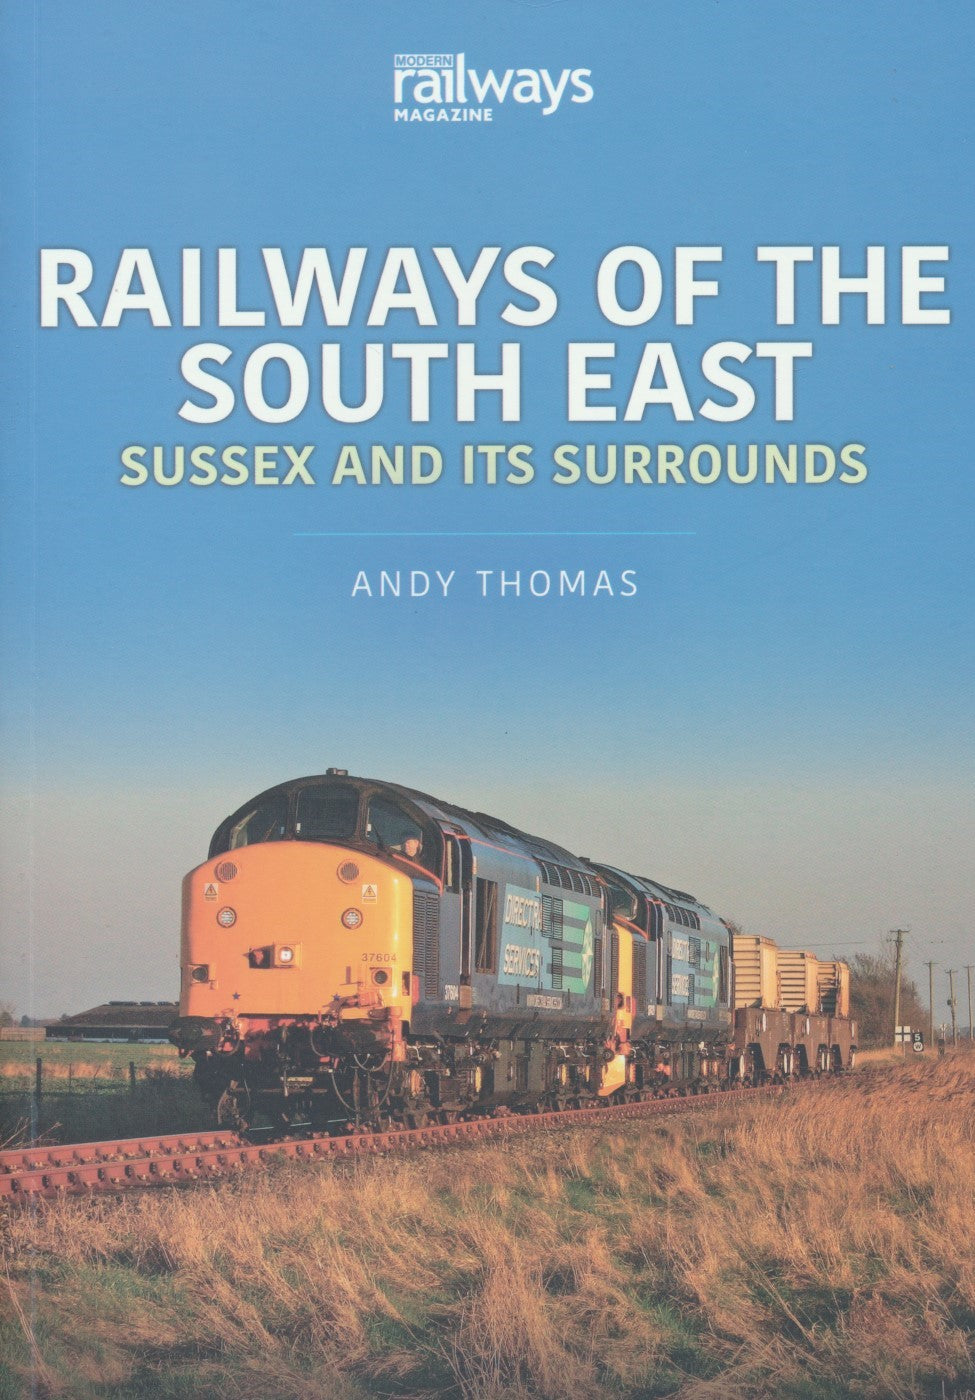 Britain's Railways Series, Volume 10 - Railways of the South East: Sussex and its Surrounds